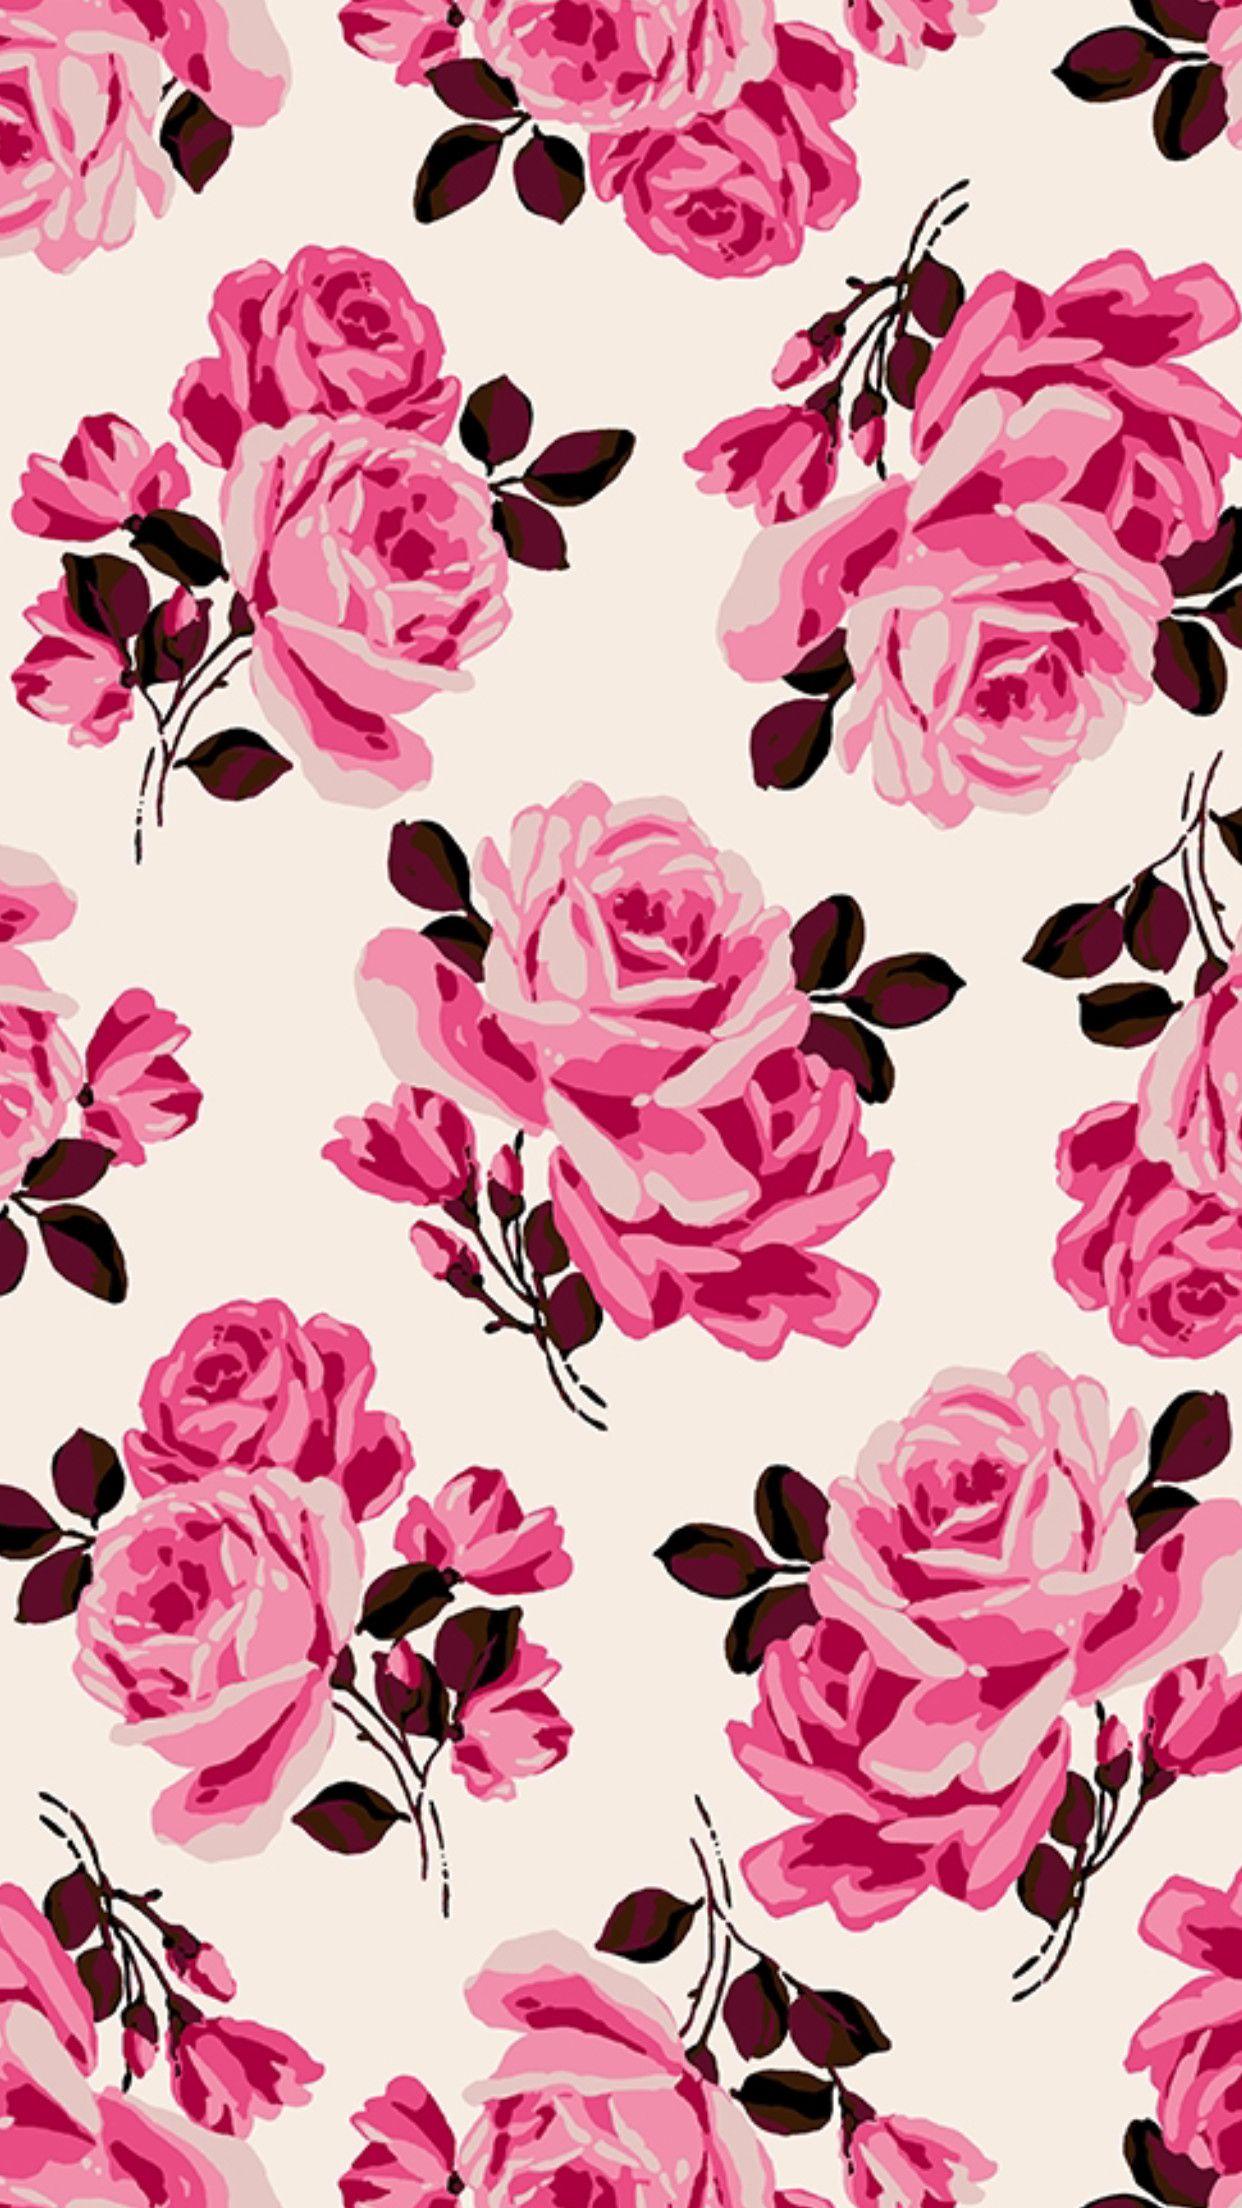 Beauty roses. Love Wallpaper BackgroundPink